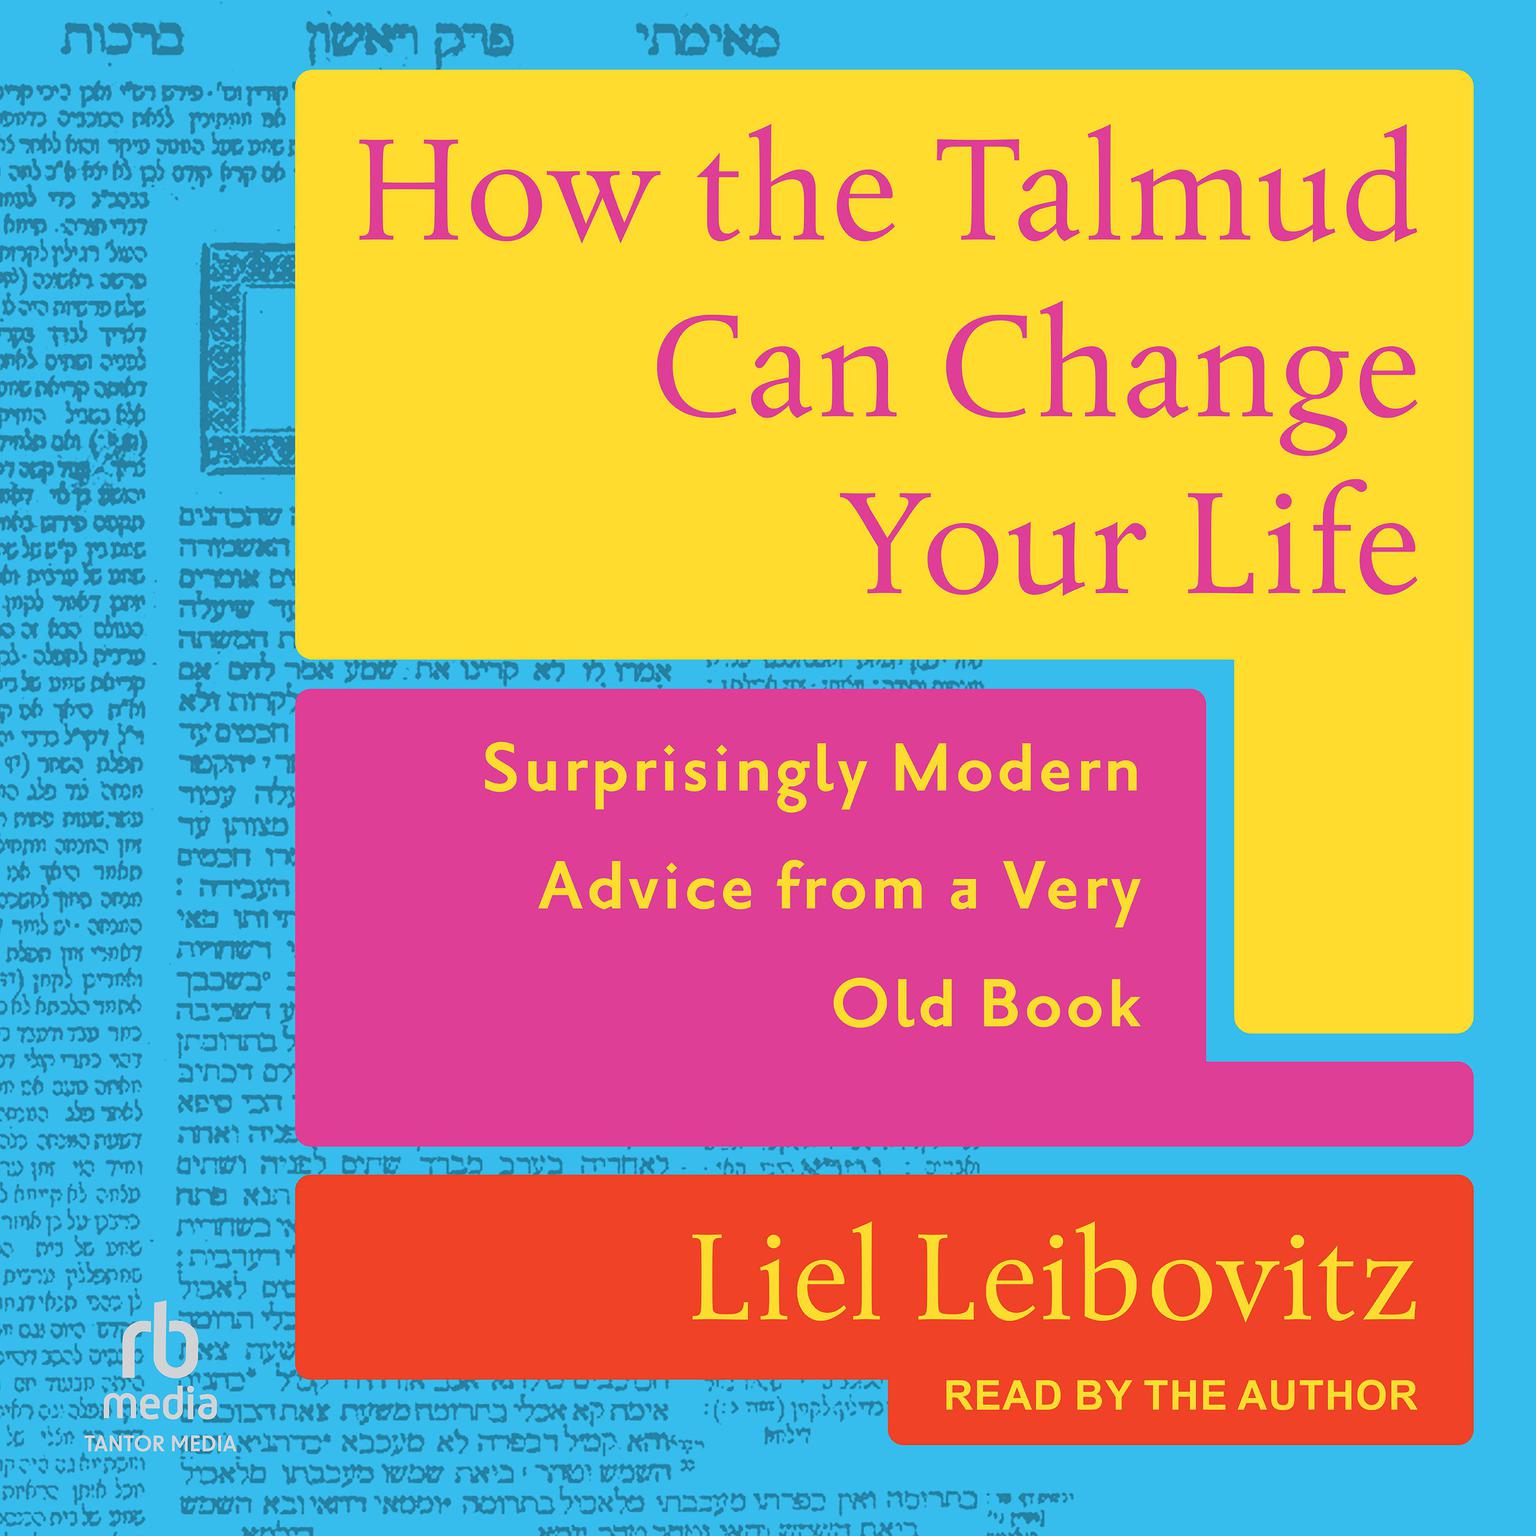 How the Talmud Can Change Your Life: Surprisingly Modern Advice from a Very Old Book Audiobook, by Liel Leibovitz